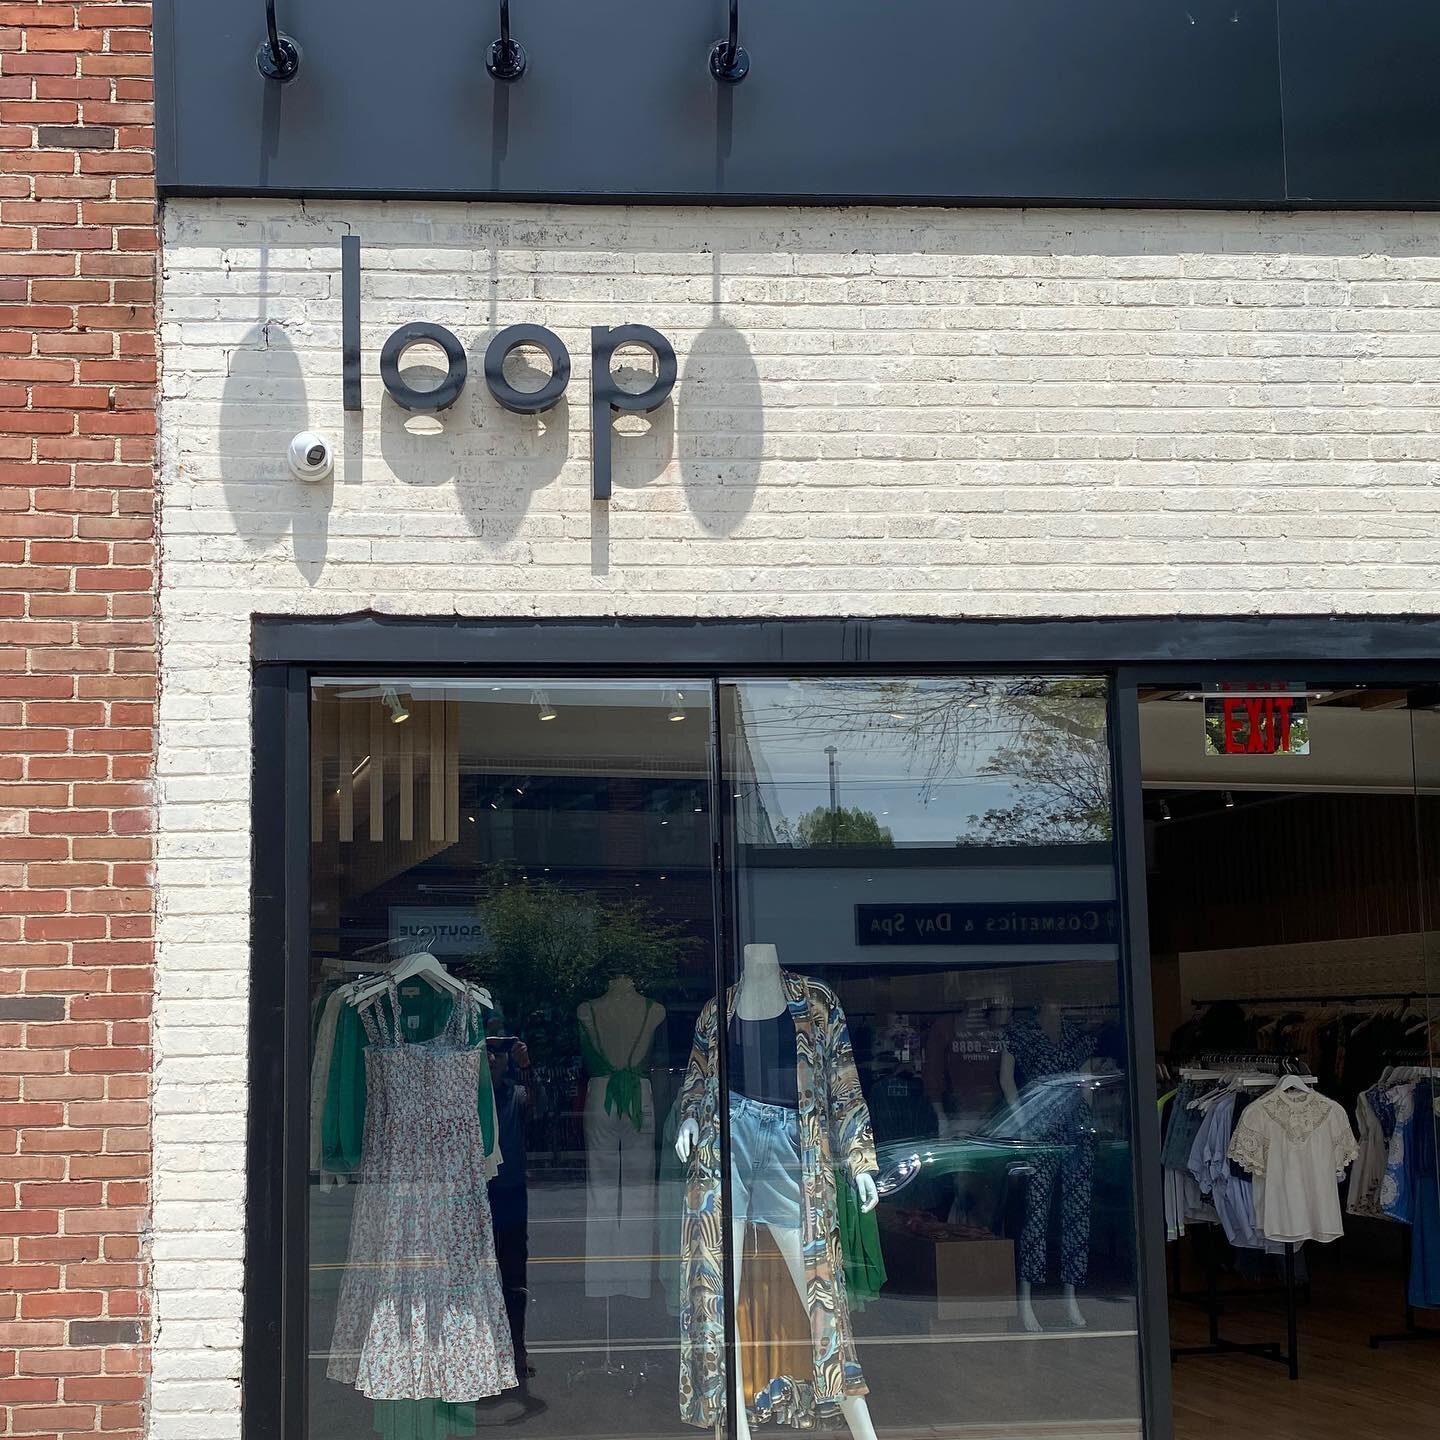 Fabricated metal letters mounted with spacers are a great option for sophisticated and streamlined signage. Congrats on the new space! @loop_port @cityscapeengineering